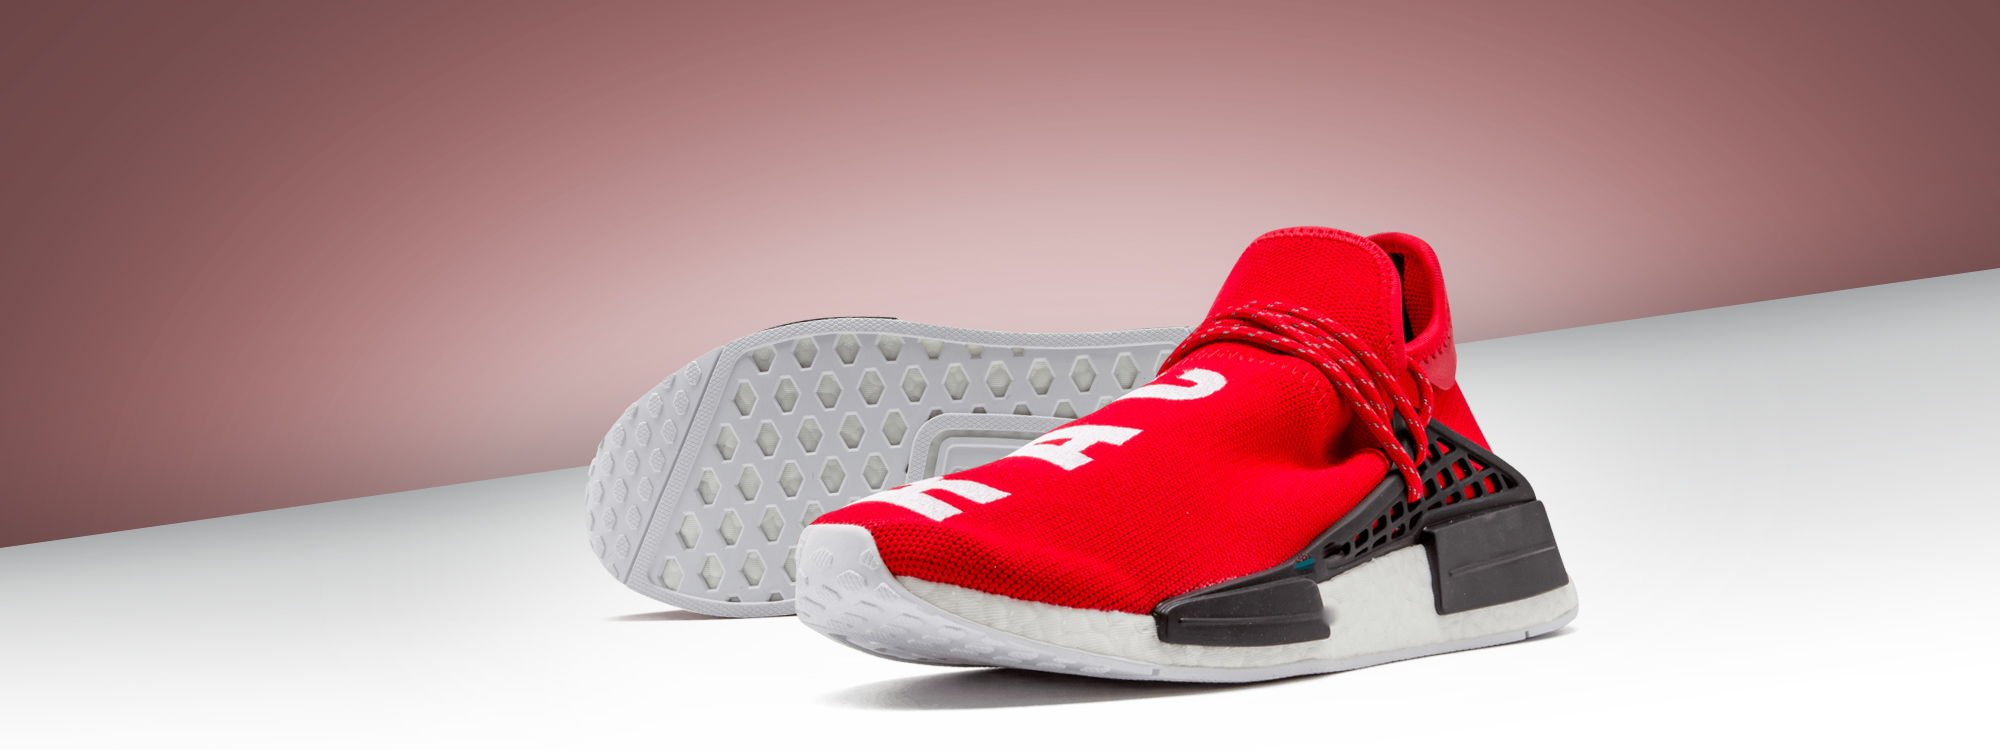 Human Race    Scarlet shoes price